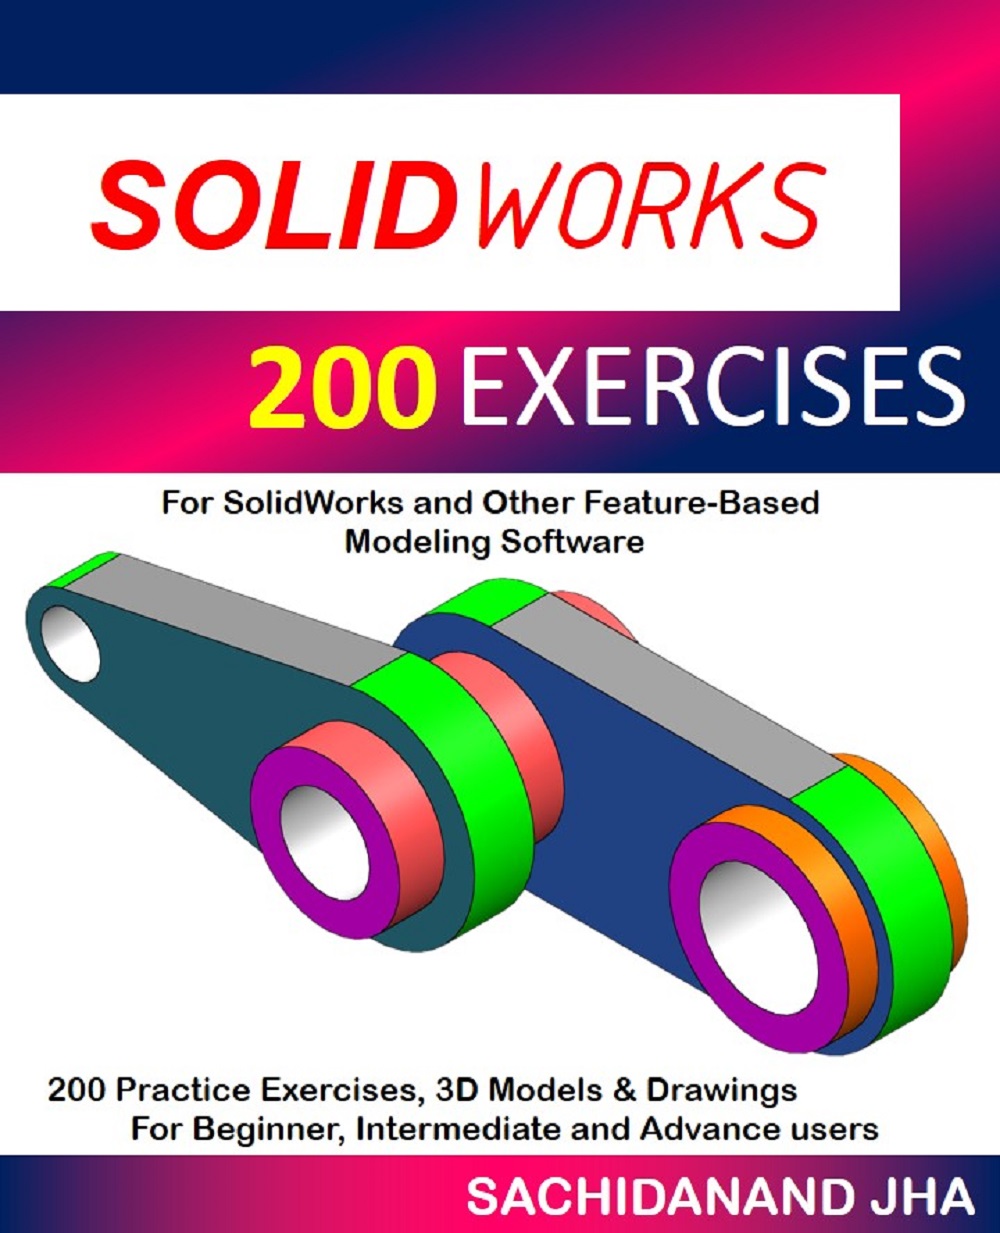 SOLIDWORKS 200 EXERCISES